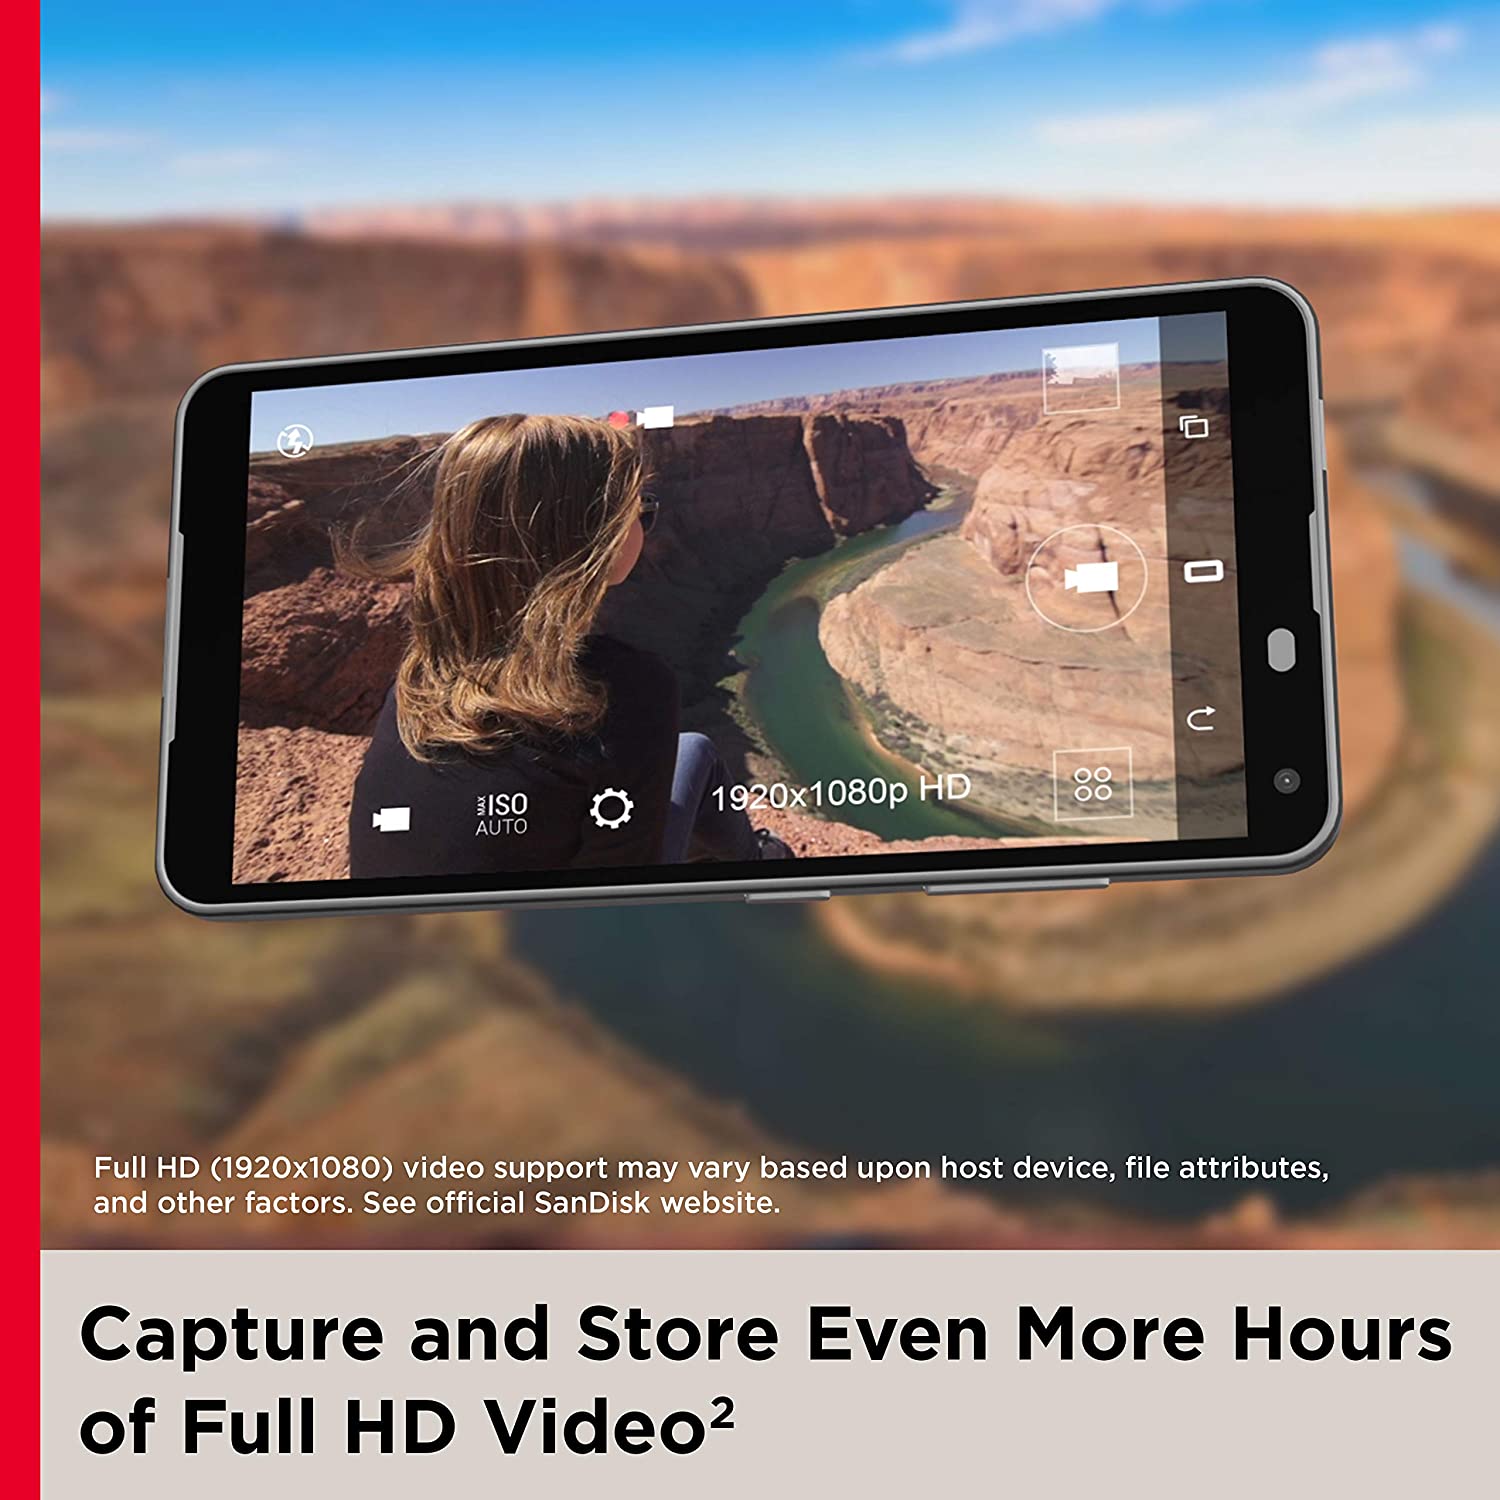 capture and store even more hours of full hd video.